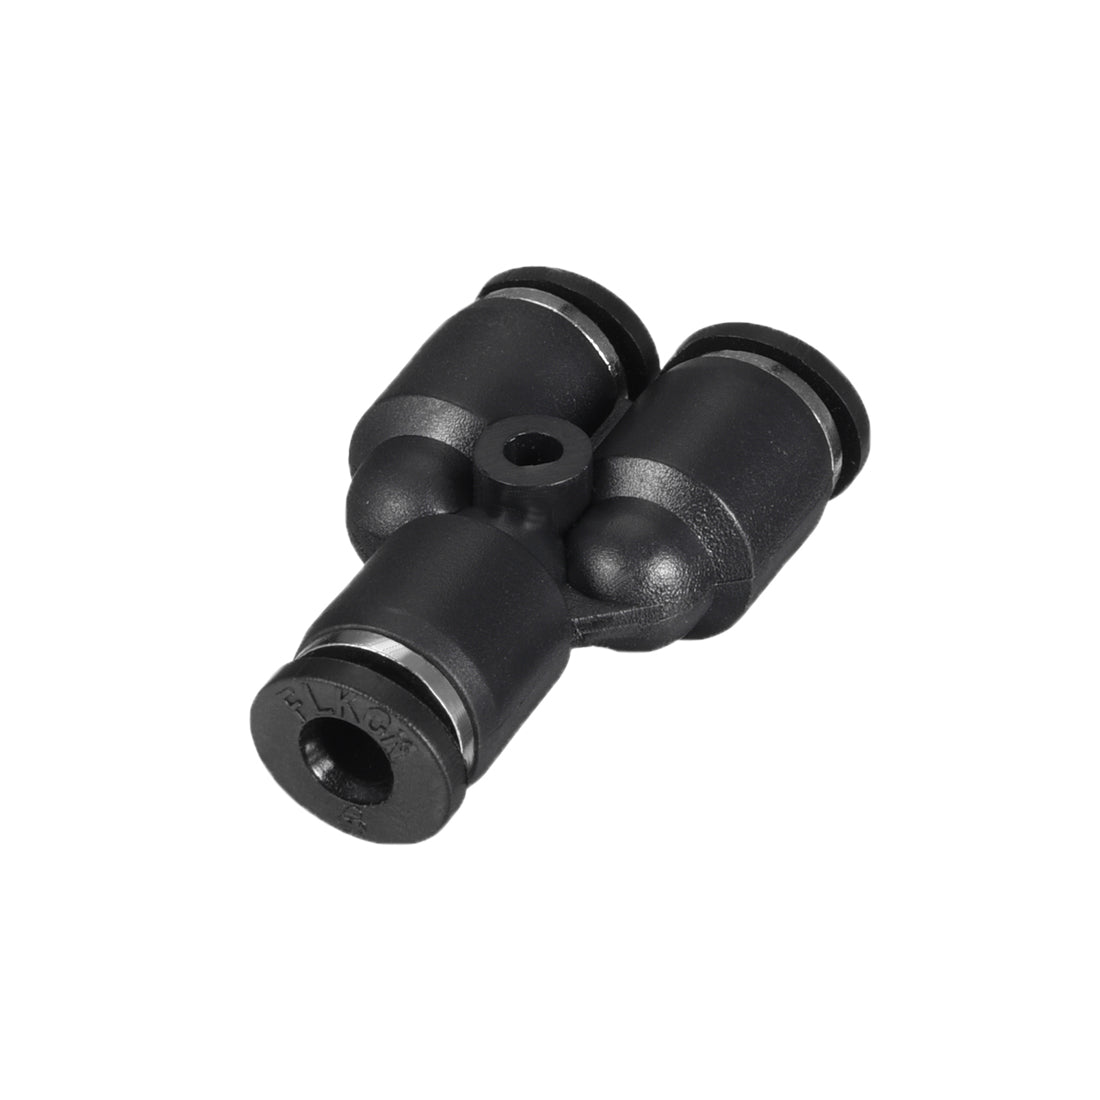 uxcell Uxcell 5pcs Push To Connect Fittings Y Type Tube Connect 4 mm or 5/32" od Push Fit Fittings Tube Fittings Push Lock Black(4mm Y tee)